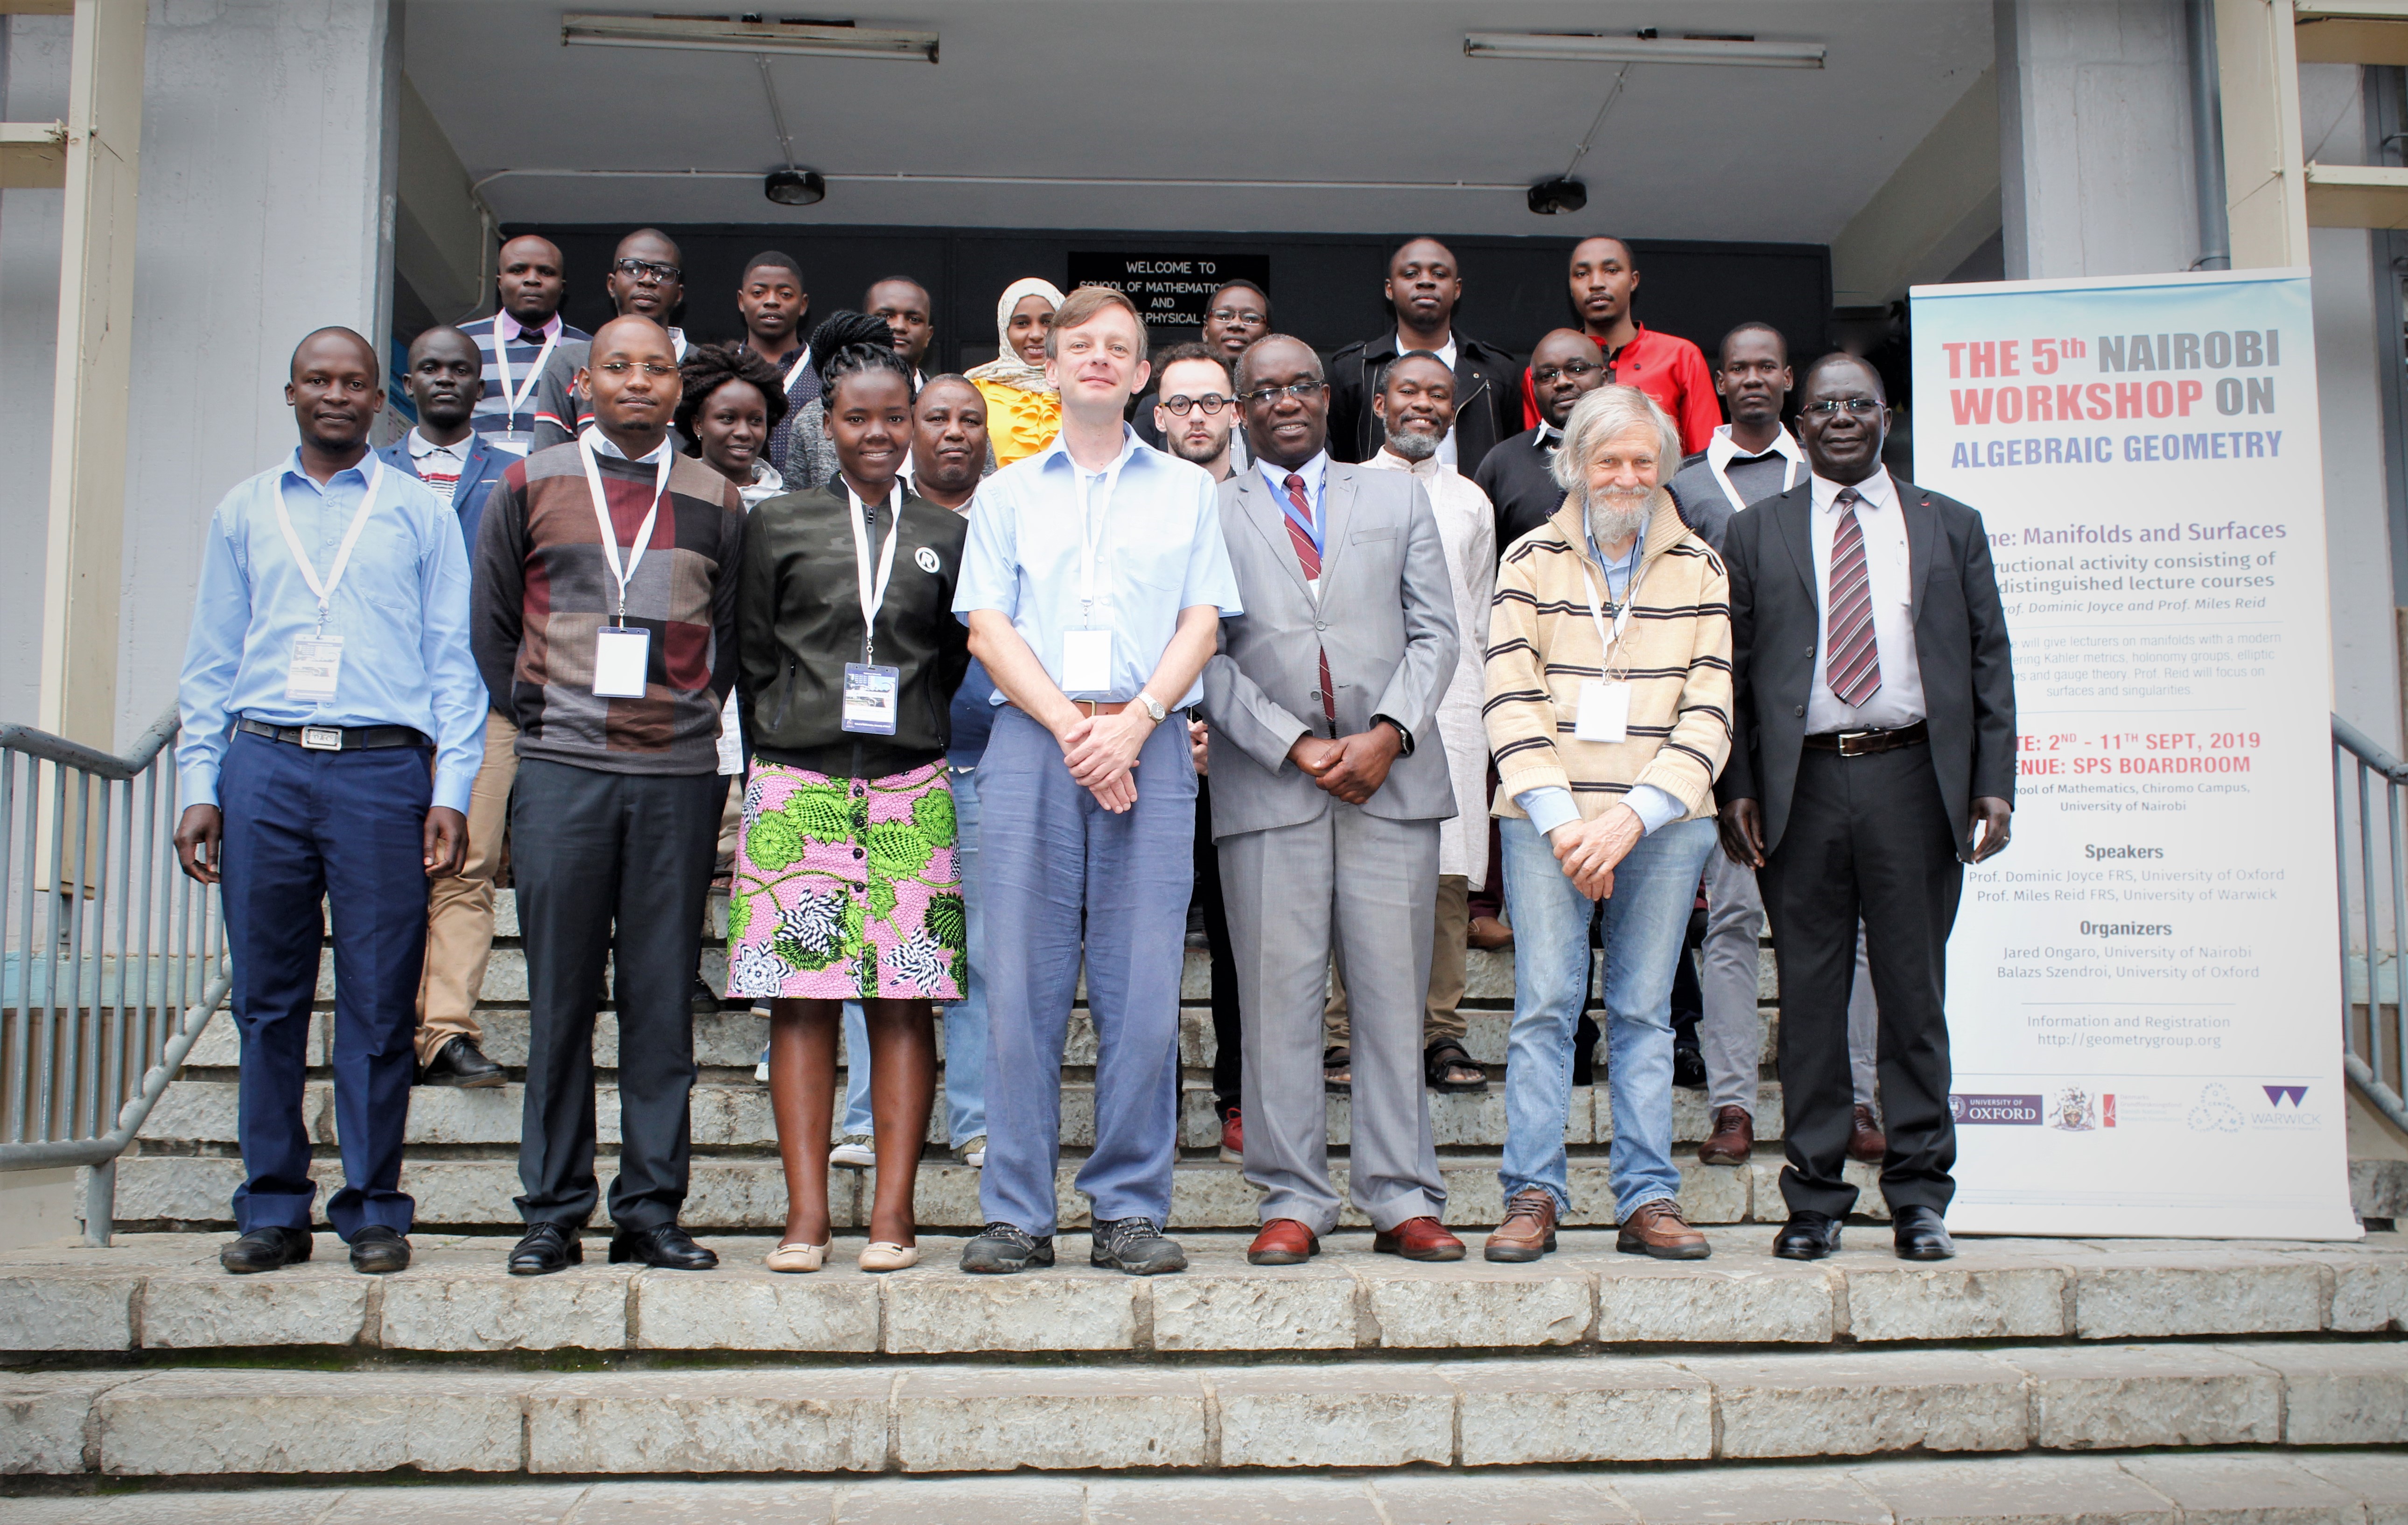 Participants during the 5th Nairobi Workshop on Algebraic Geometry held on 2nd to 11th September 2019 at the School of Mathematic